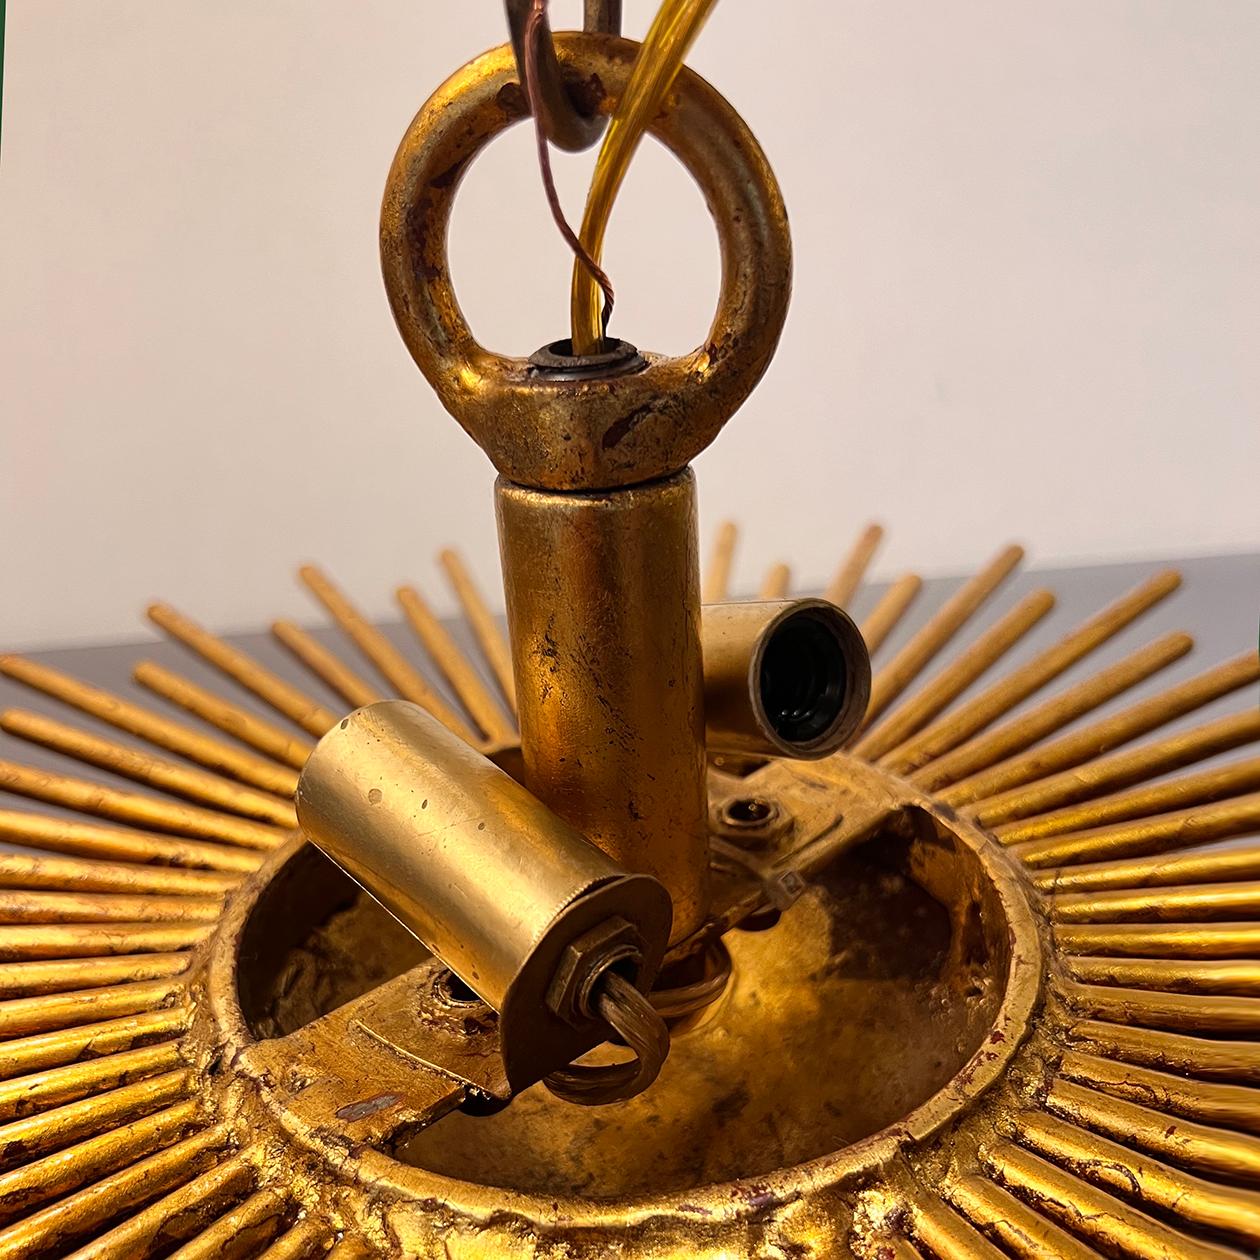 A set of circa 1930's French gilt metal light fixtures shaped as a sunburst, 2 interior candelabra lights each.  Sold individually.

Measurements:
Height (drop): 5